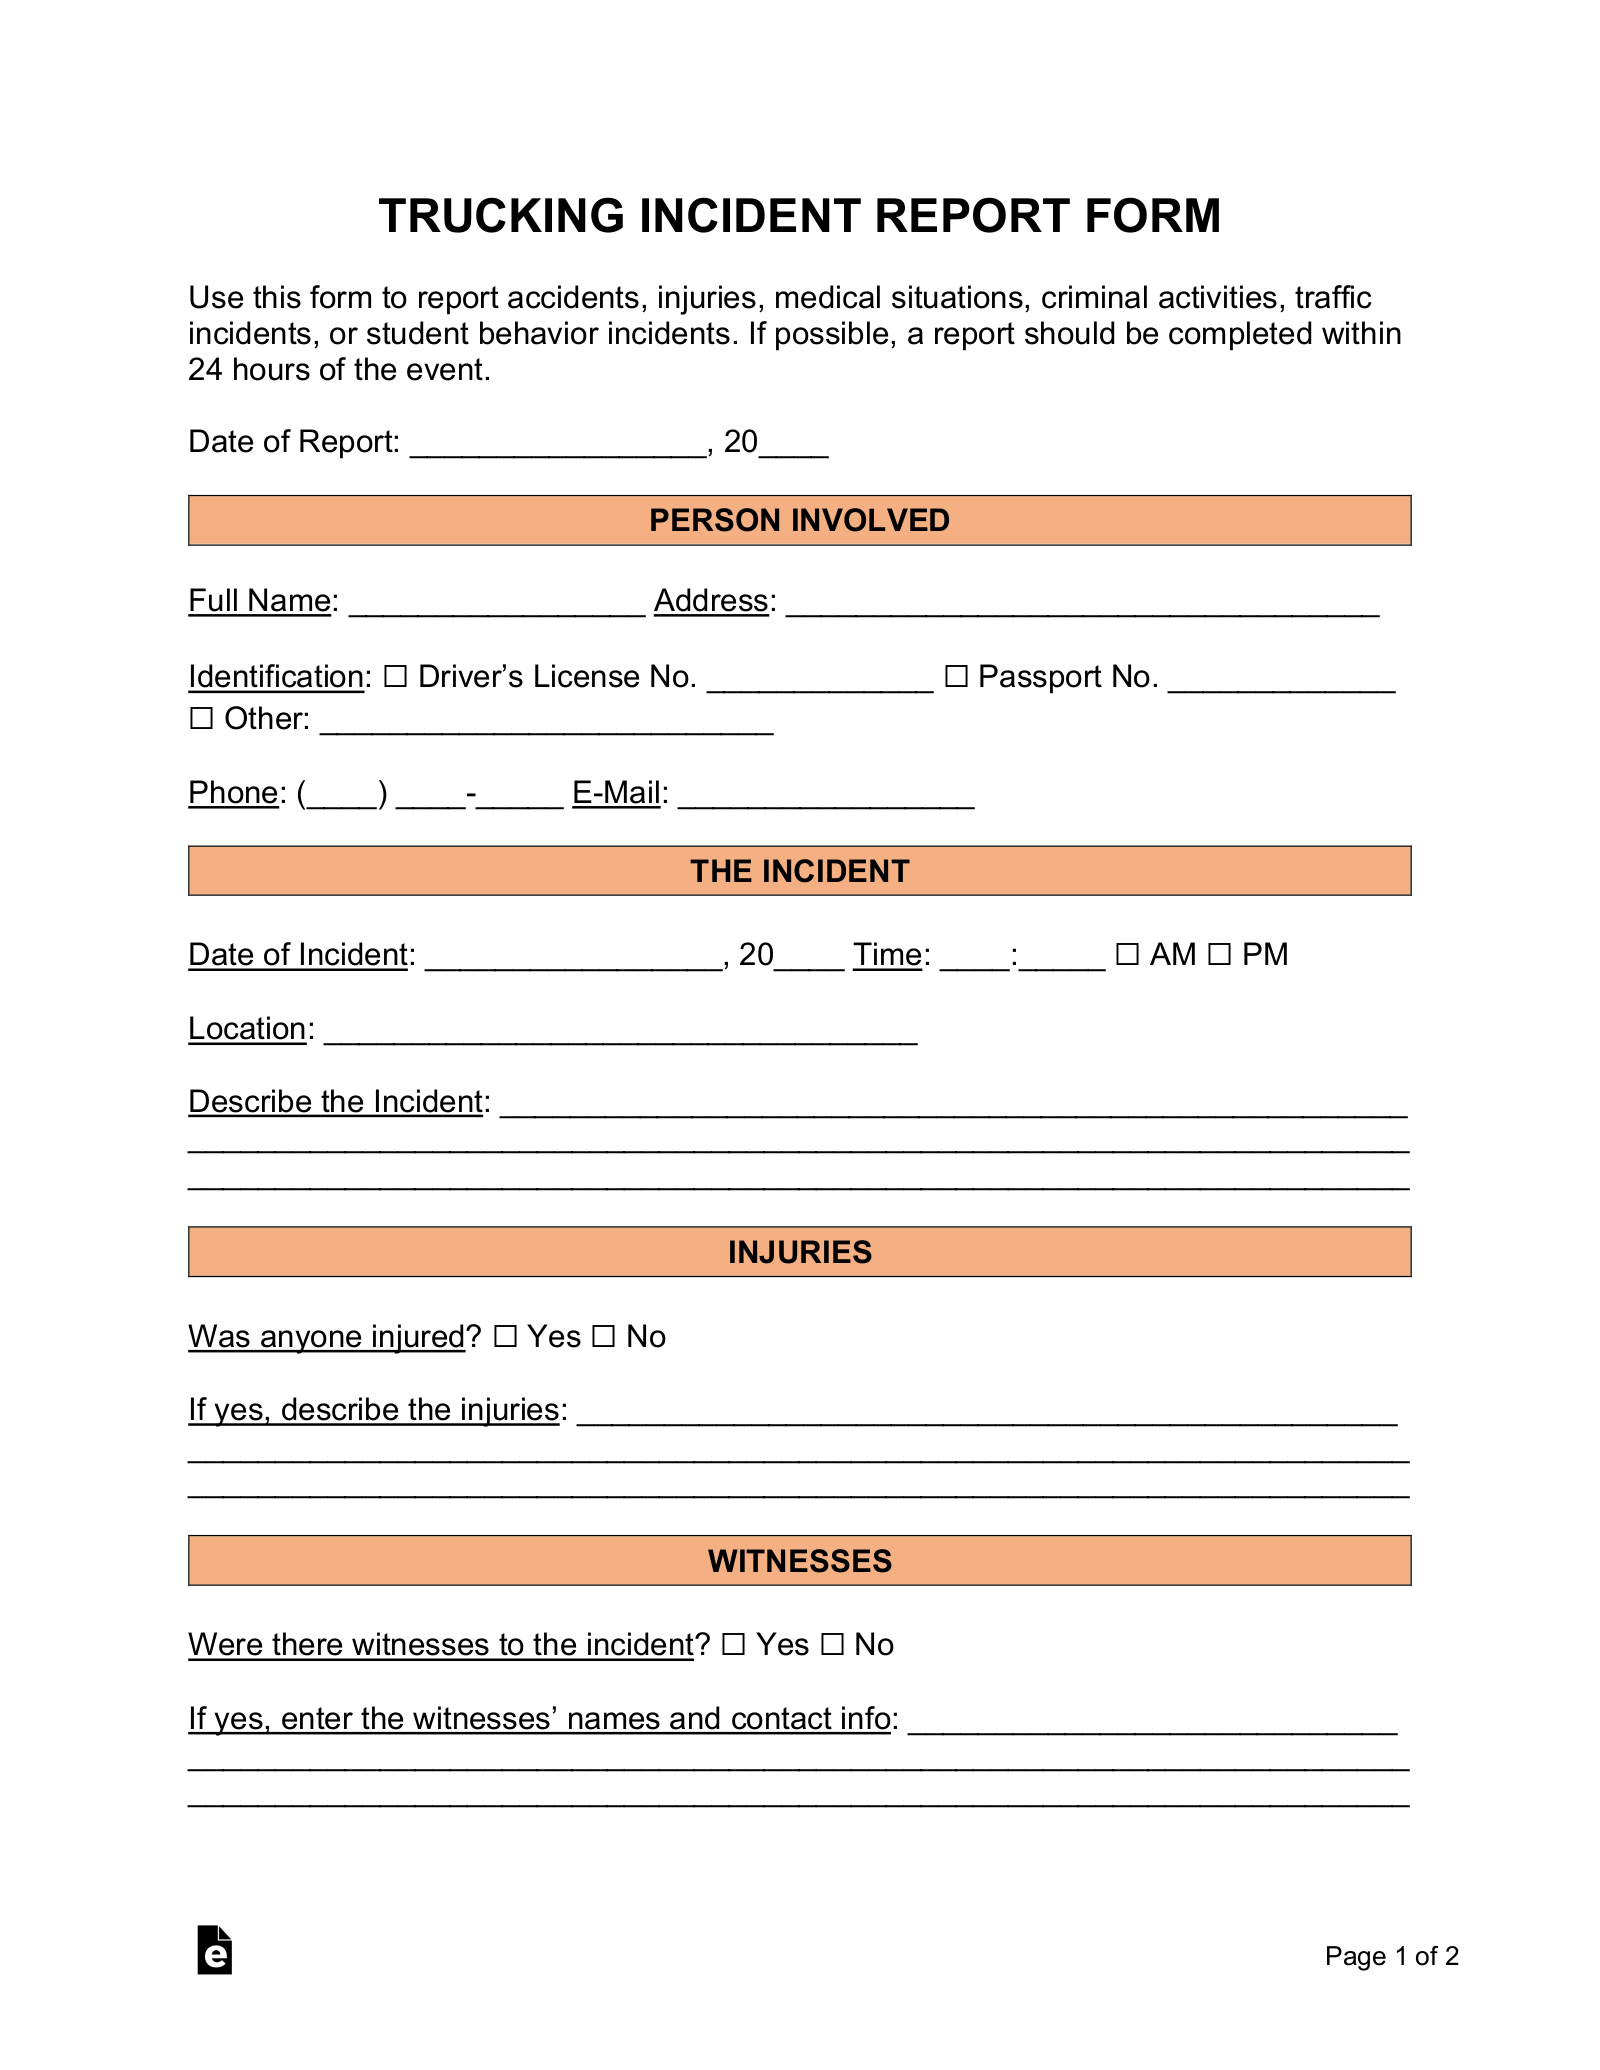 Trucking Incident Report Template